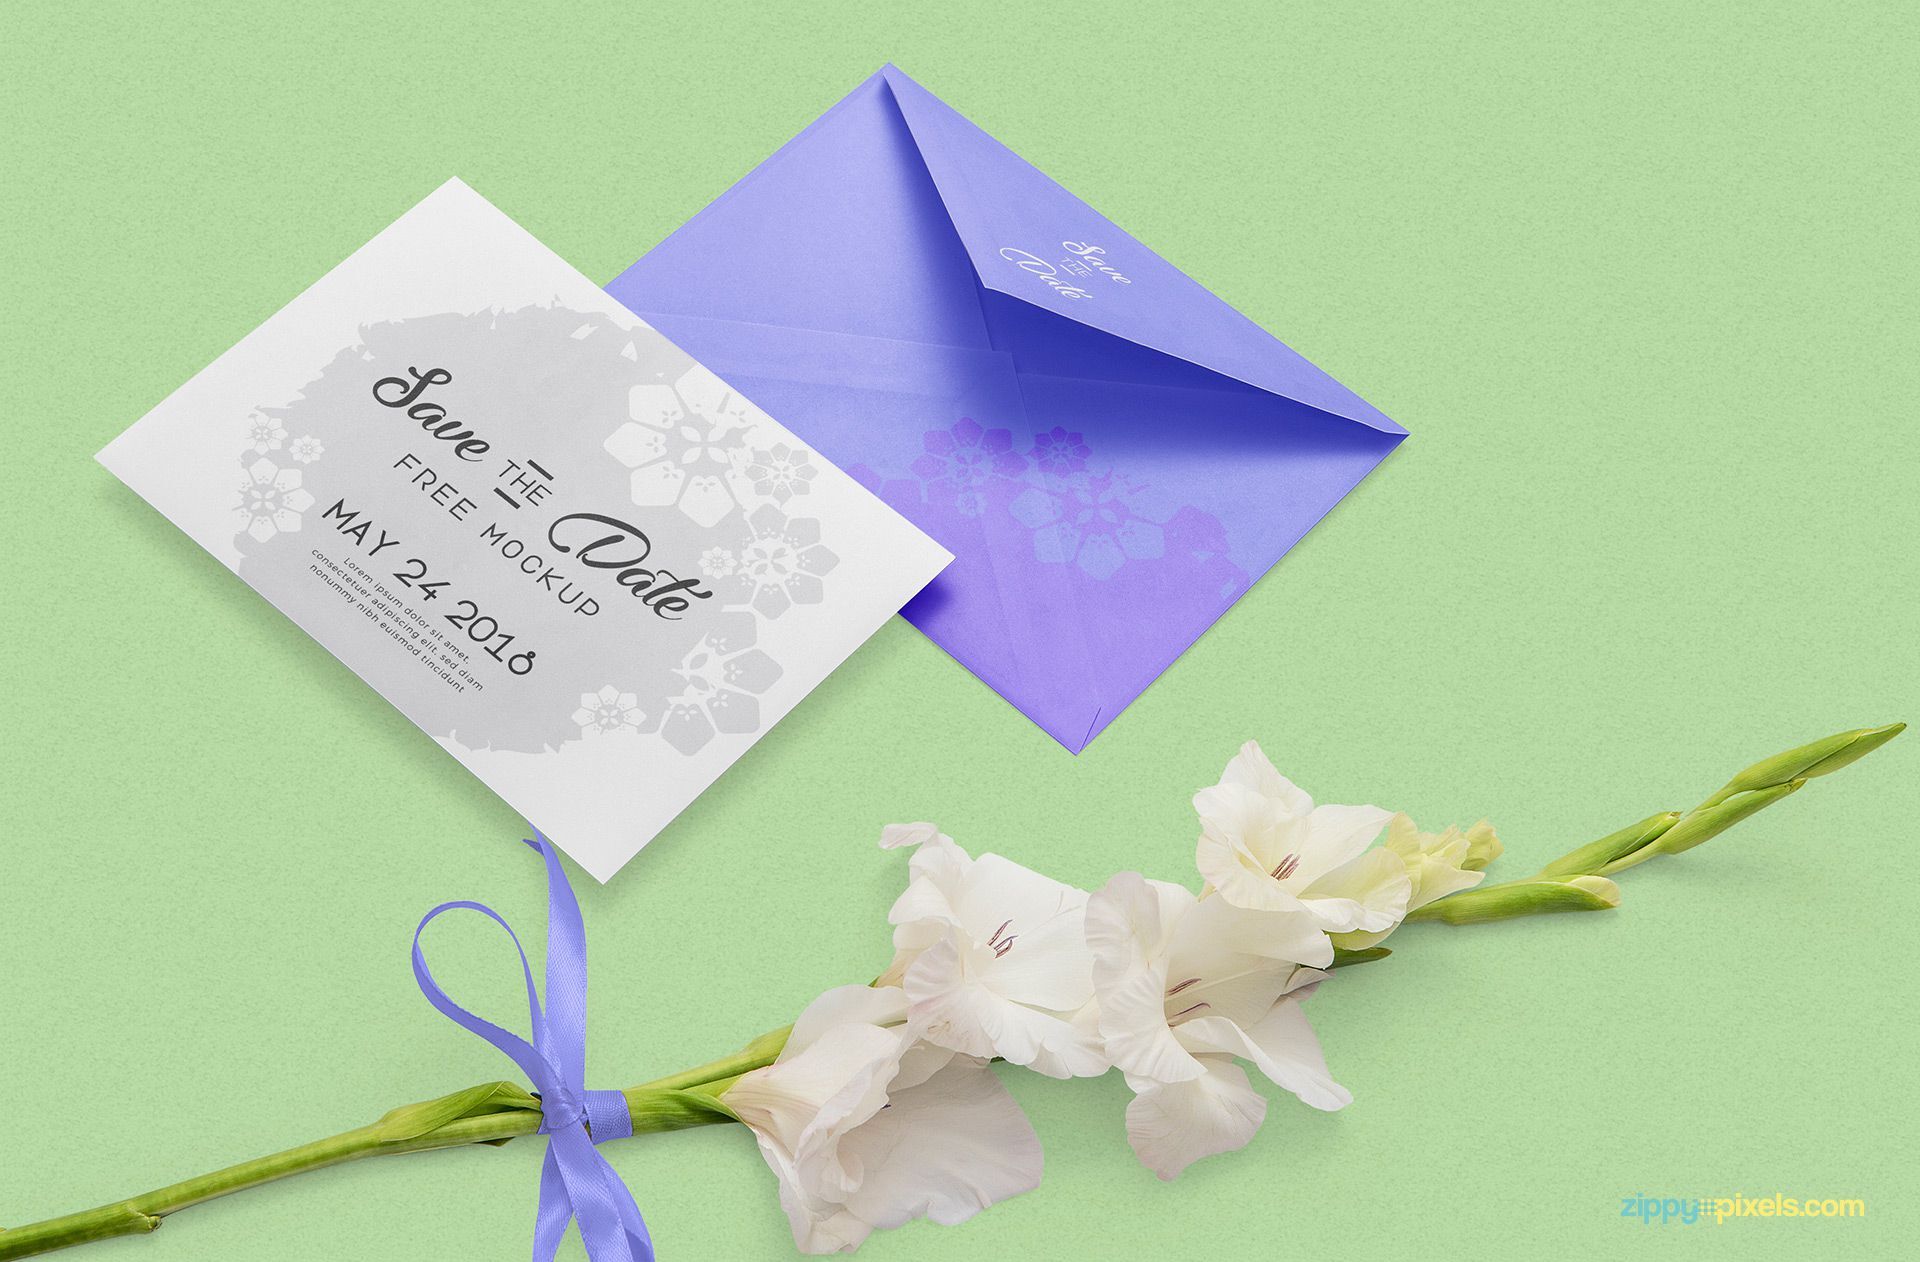 Greeting Card and Envelope With a Ribbon Tied Flower Mockup FREE PSD